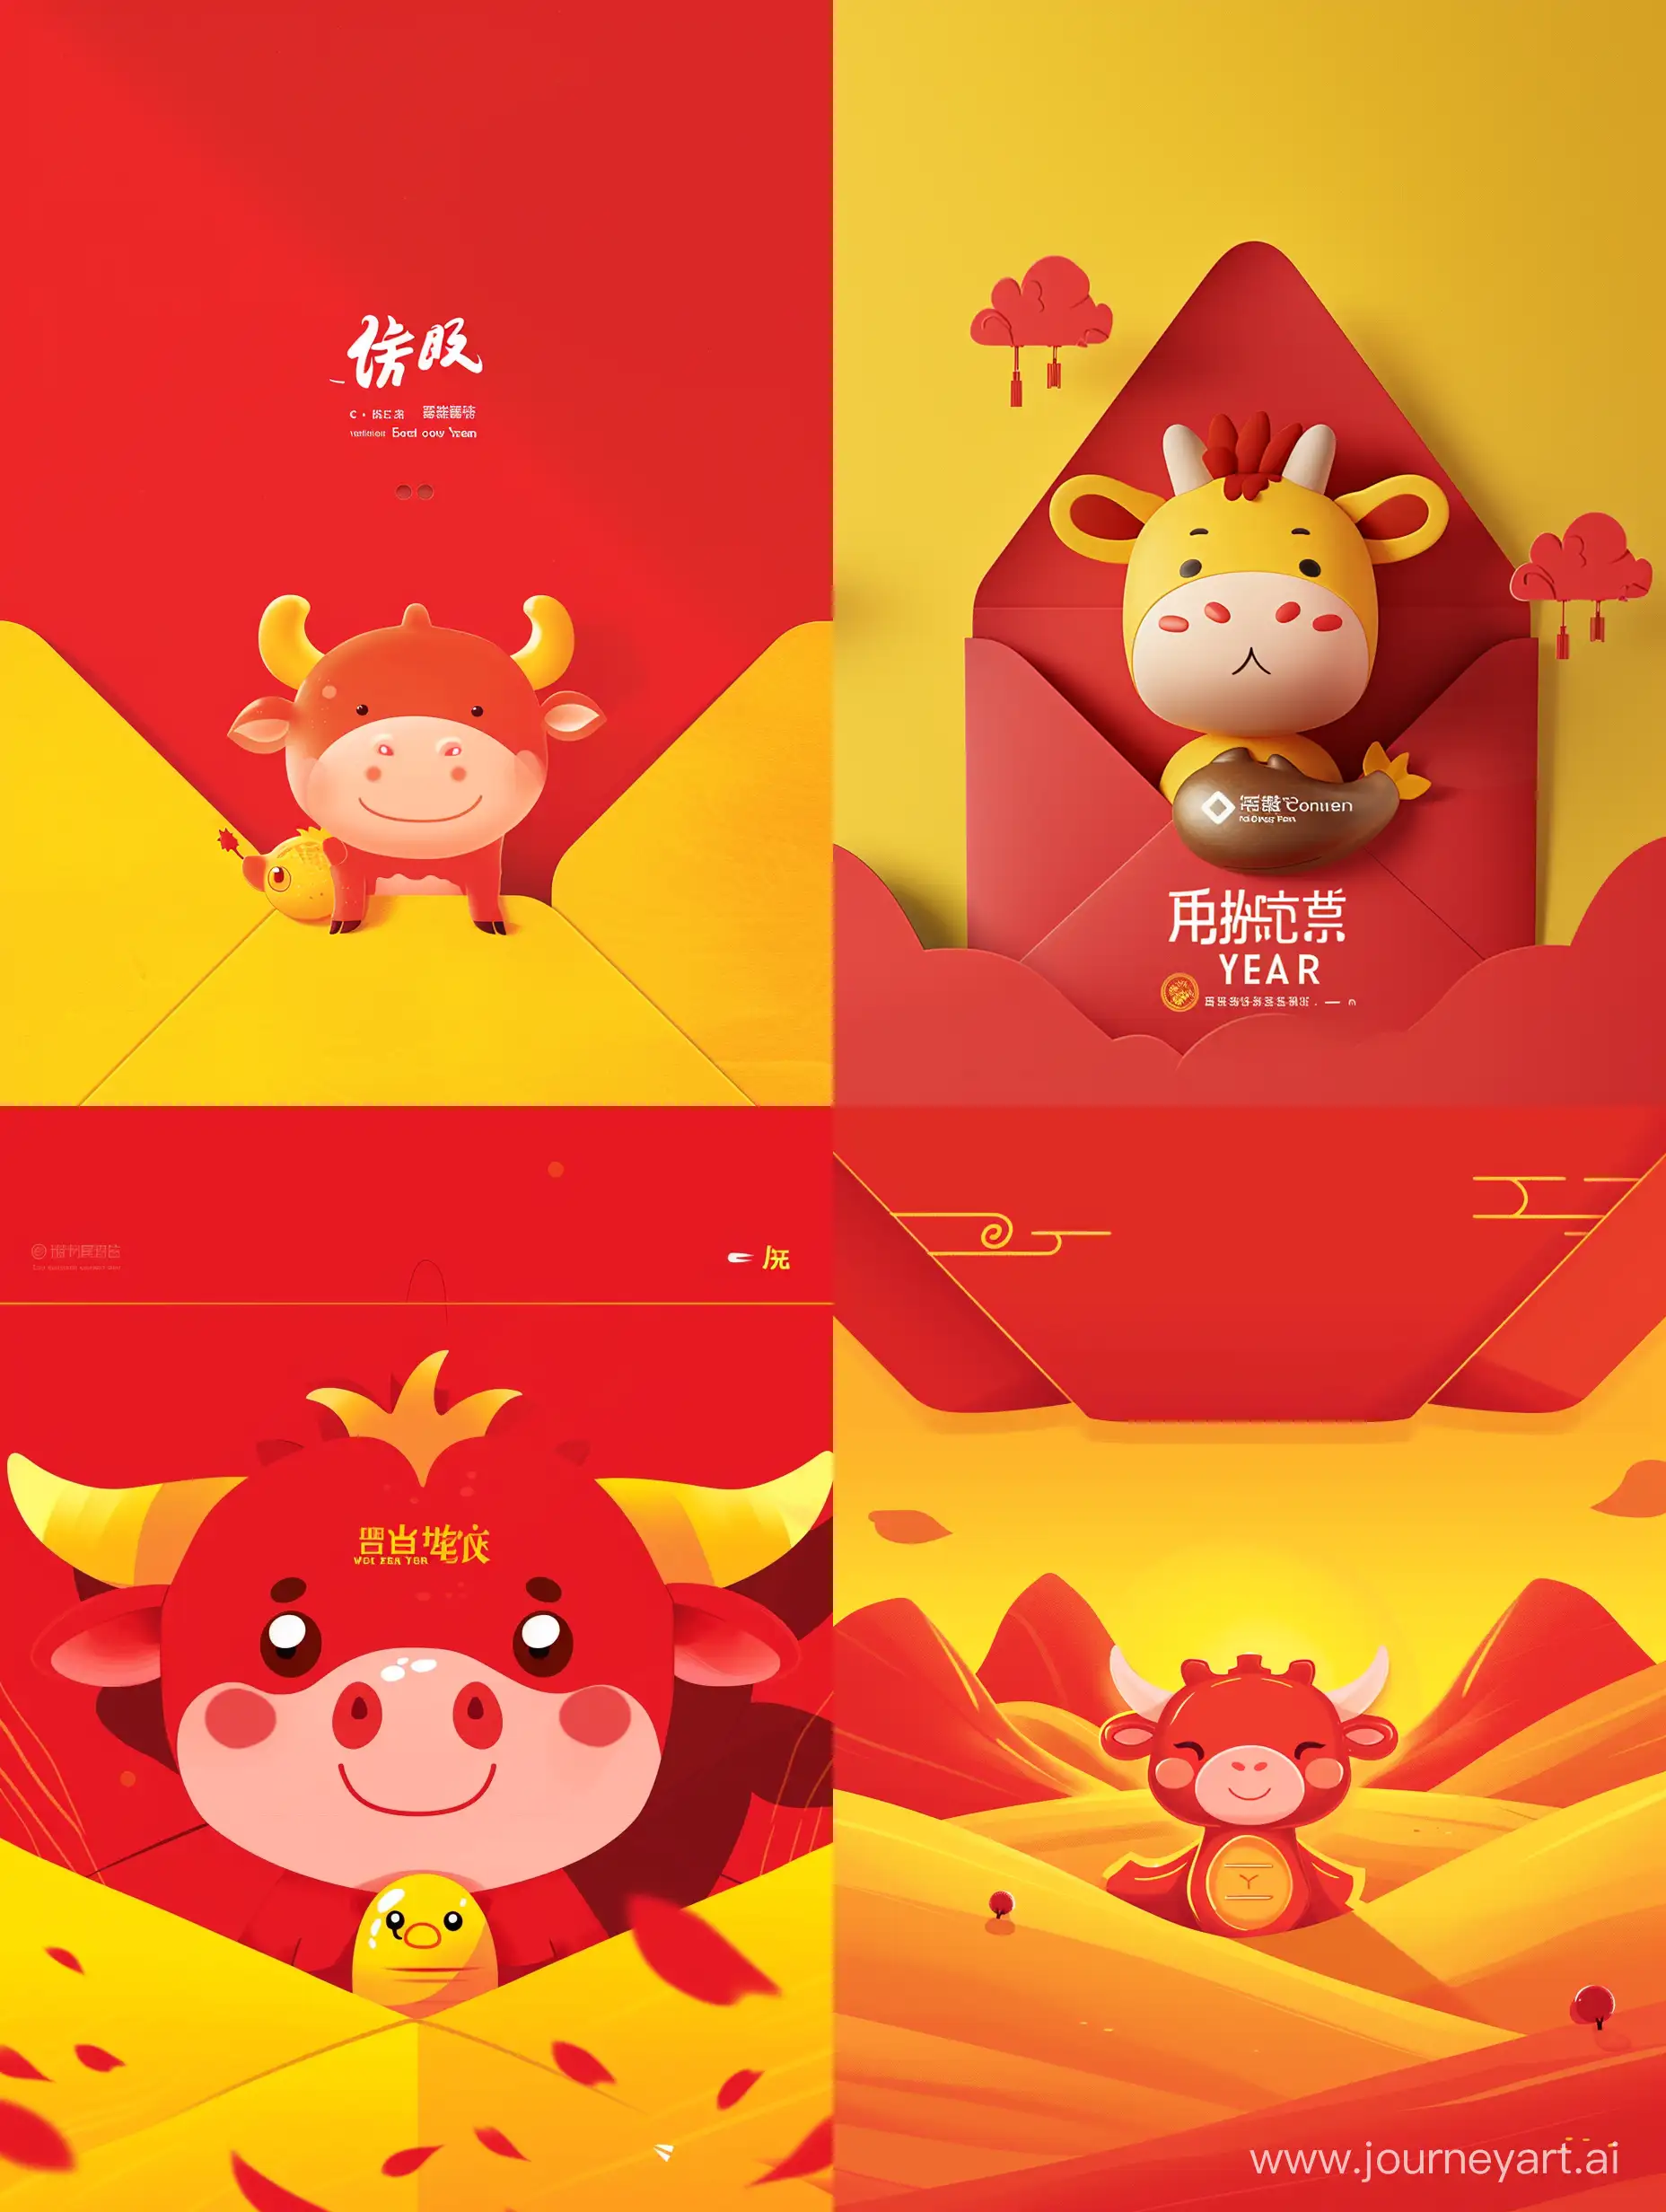 Design a WeChat Dragon Year red envelope cover with a strong sense of technology. The main color tone is red and yellow, with the "cow" character as the element, gradually covering the cover with a handsome small seal cow character in the center.